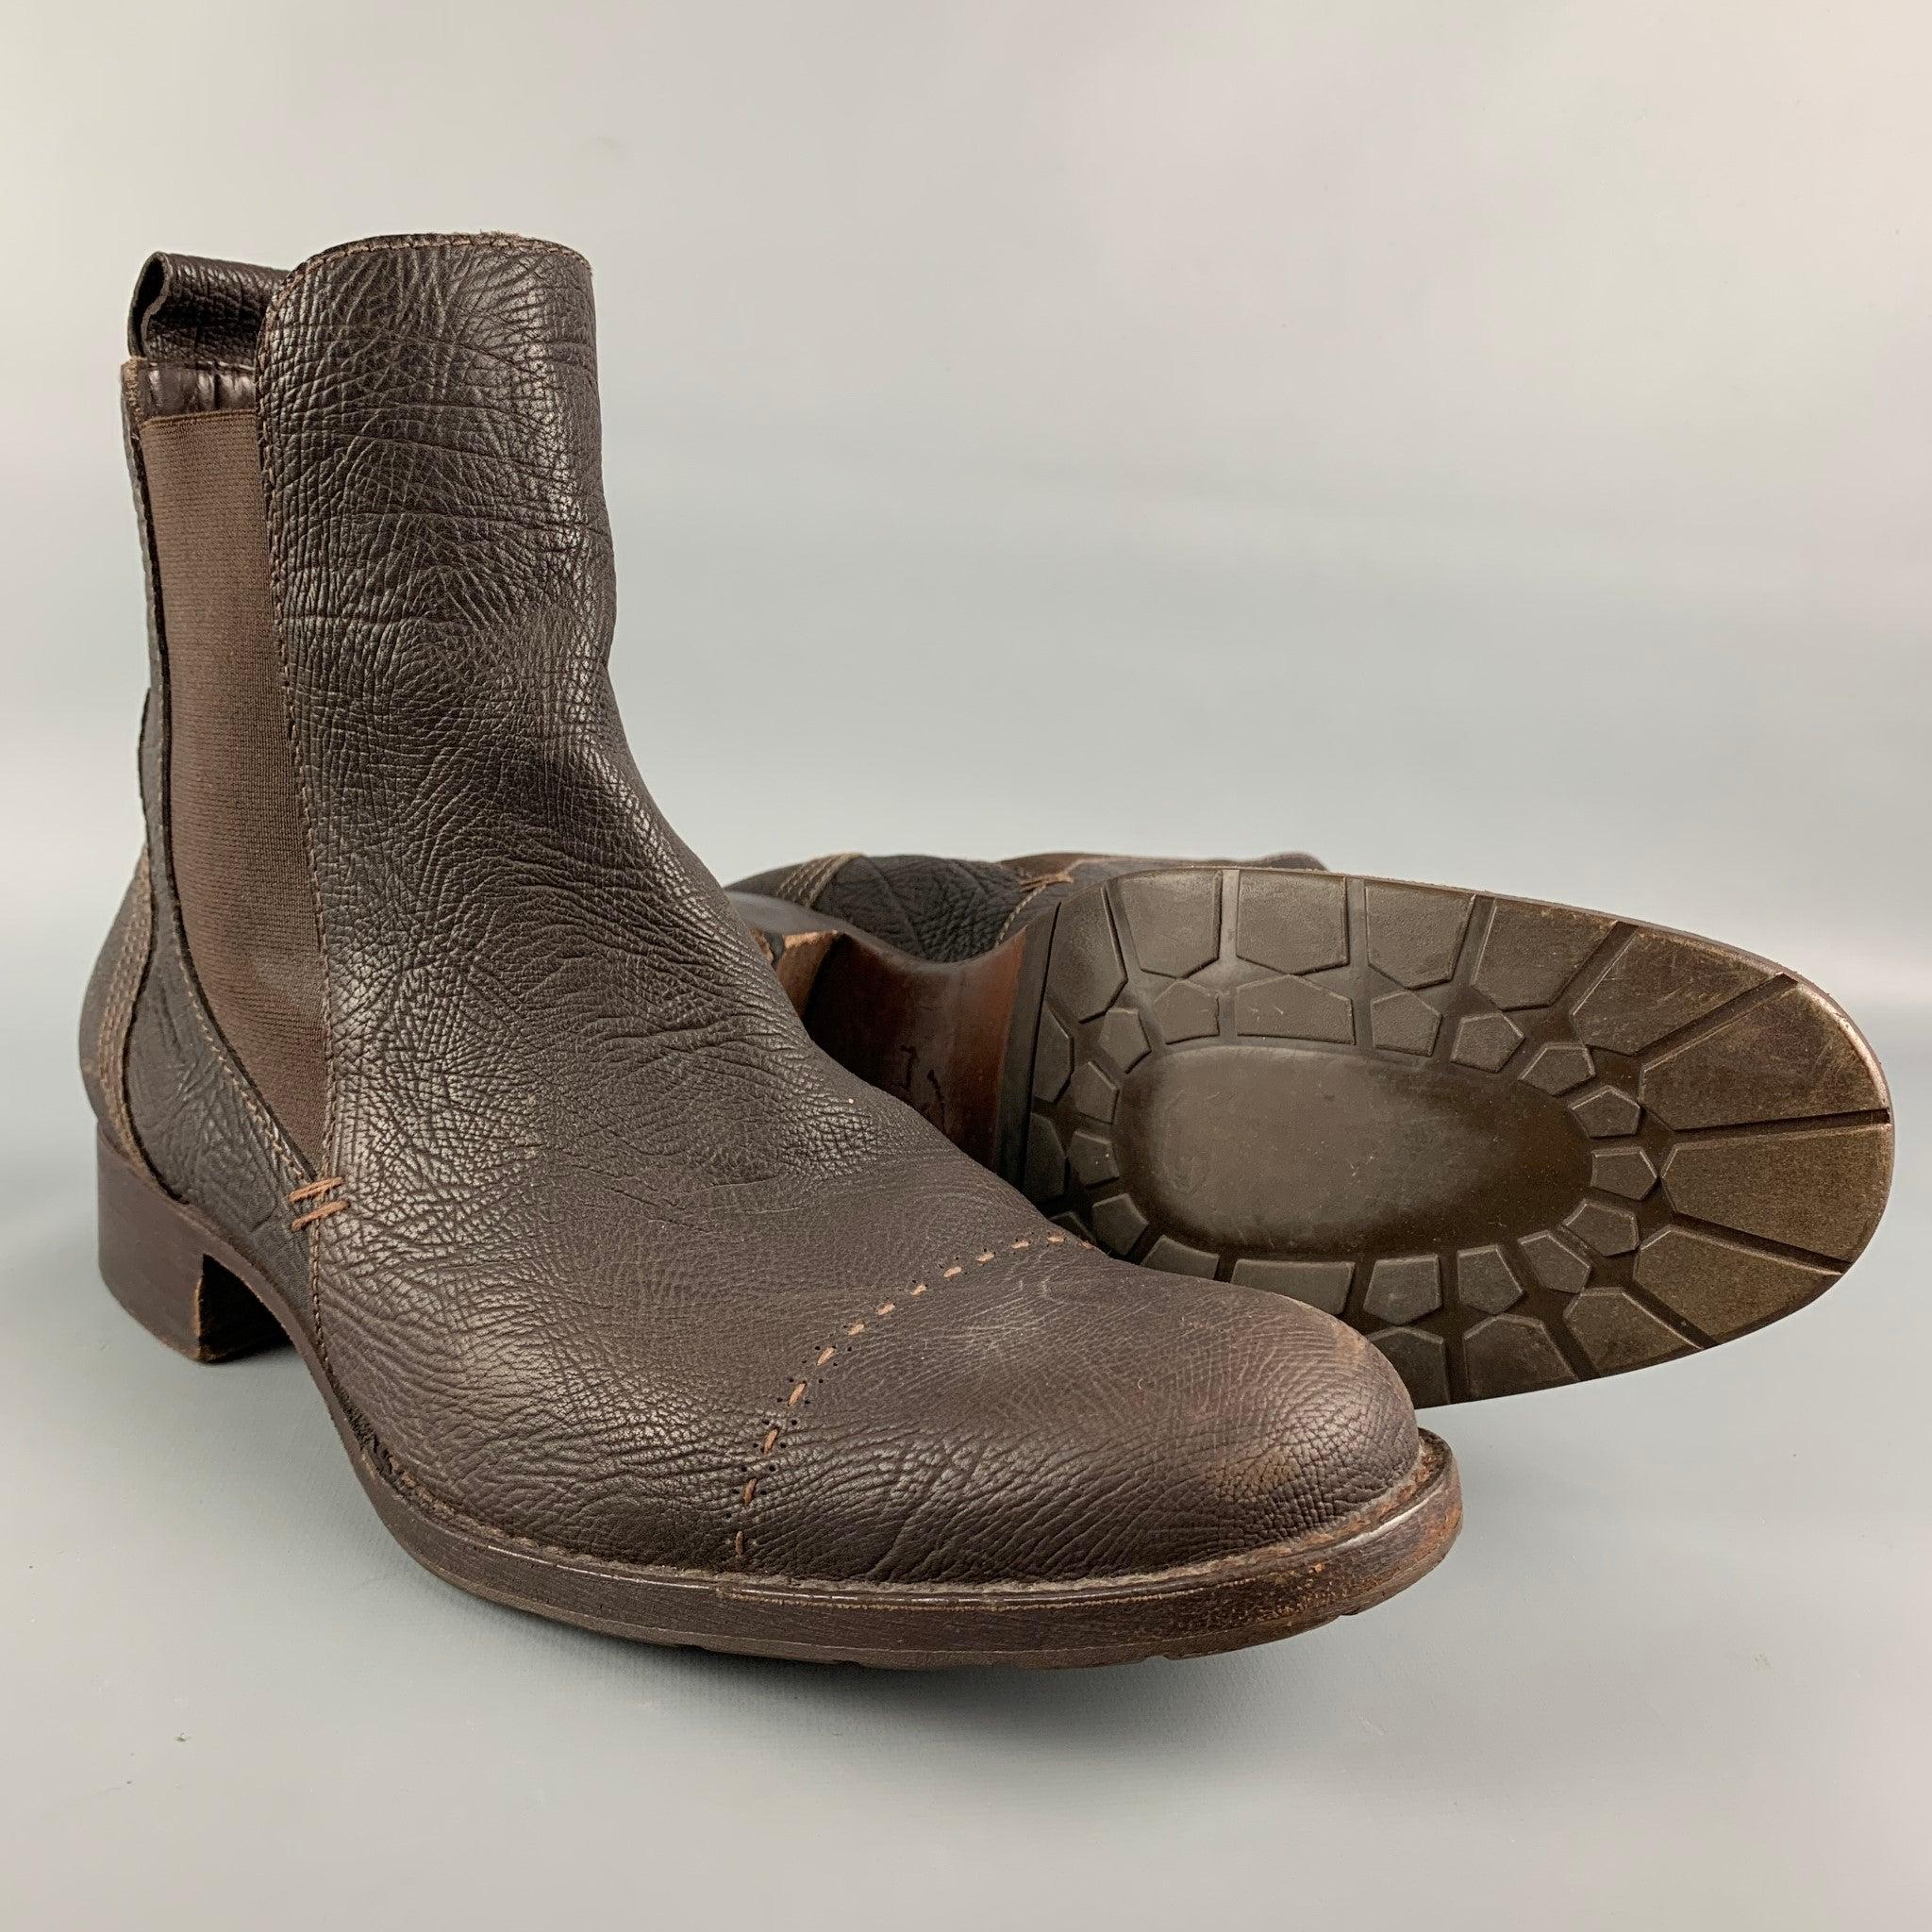 HENRY BEGUELIN Size 10 Brown Contrast Stitch Cap Toe Boots In Good Condition For Sale In San Francisco, CA